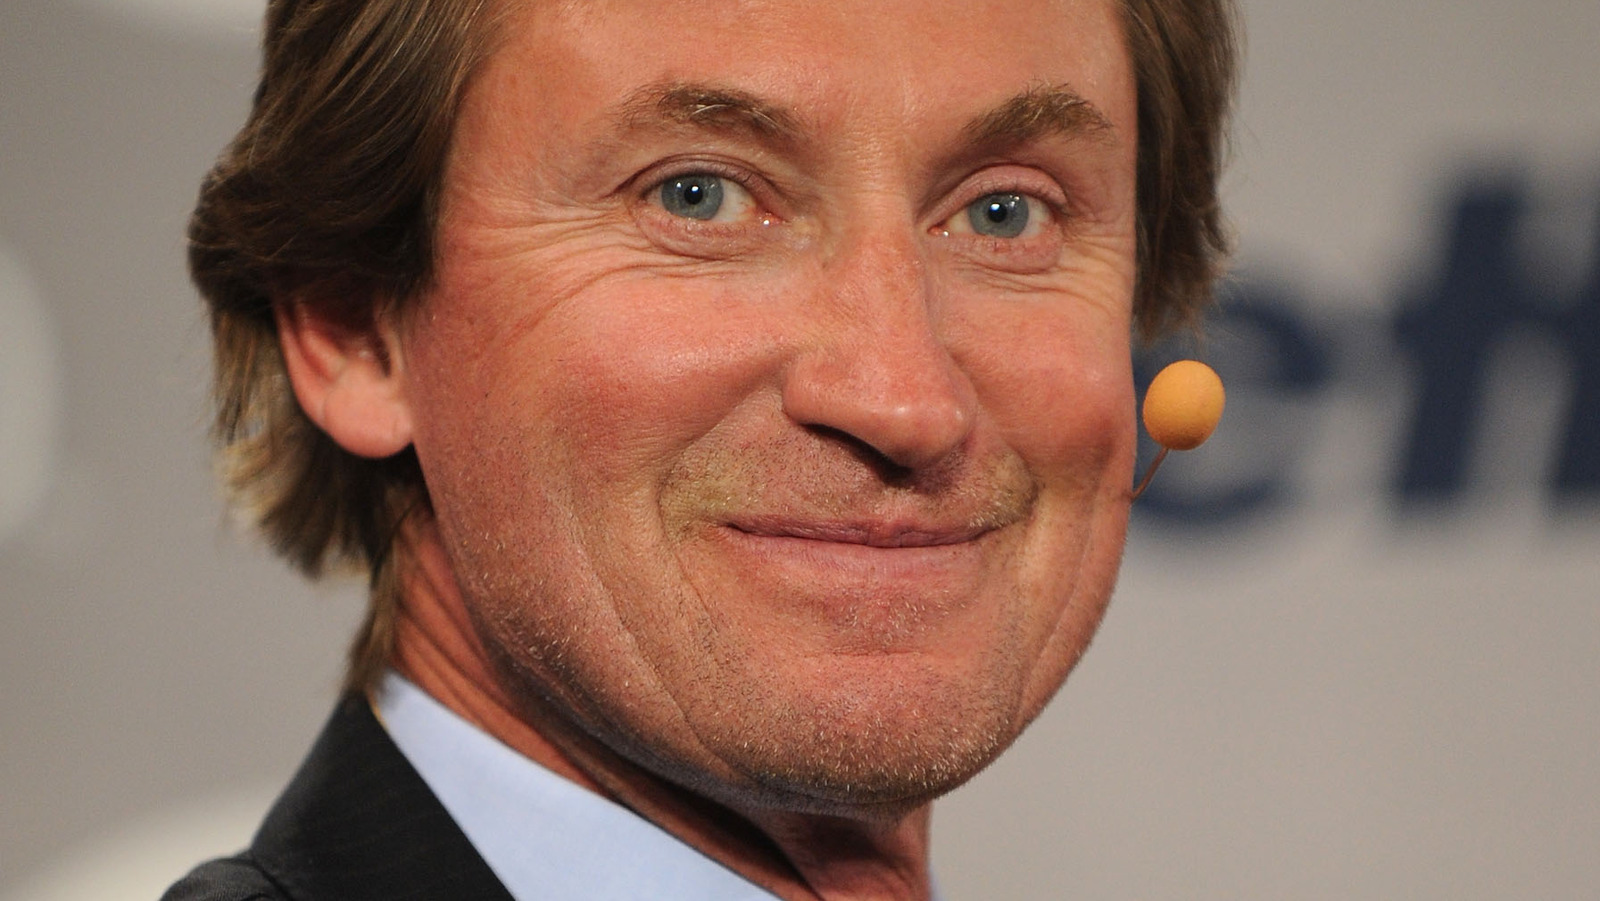 Wayne Gretzky knew it was time to retire when opponents started warning him  before he got hit